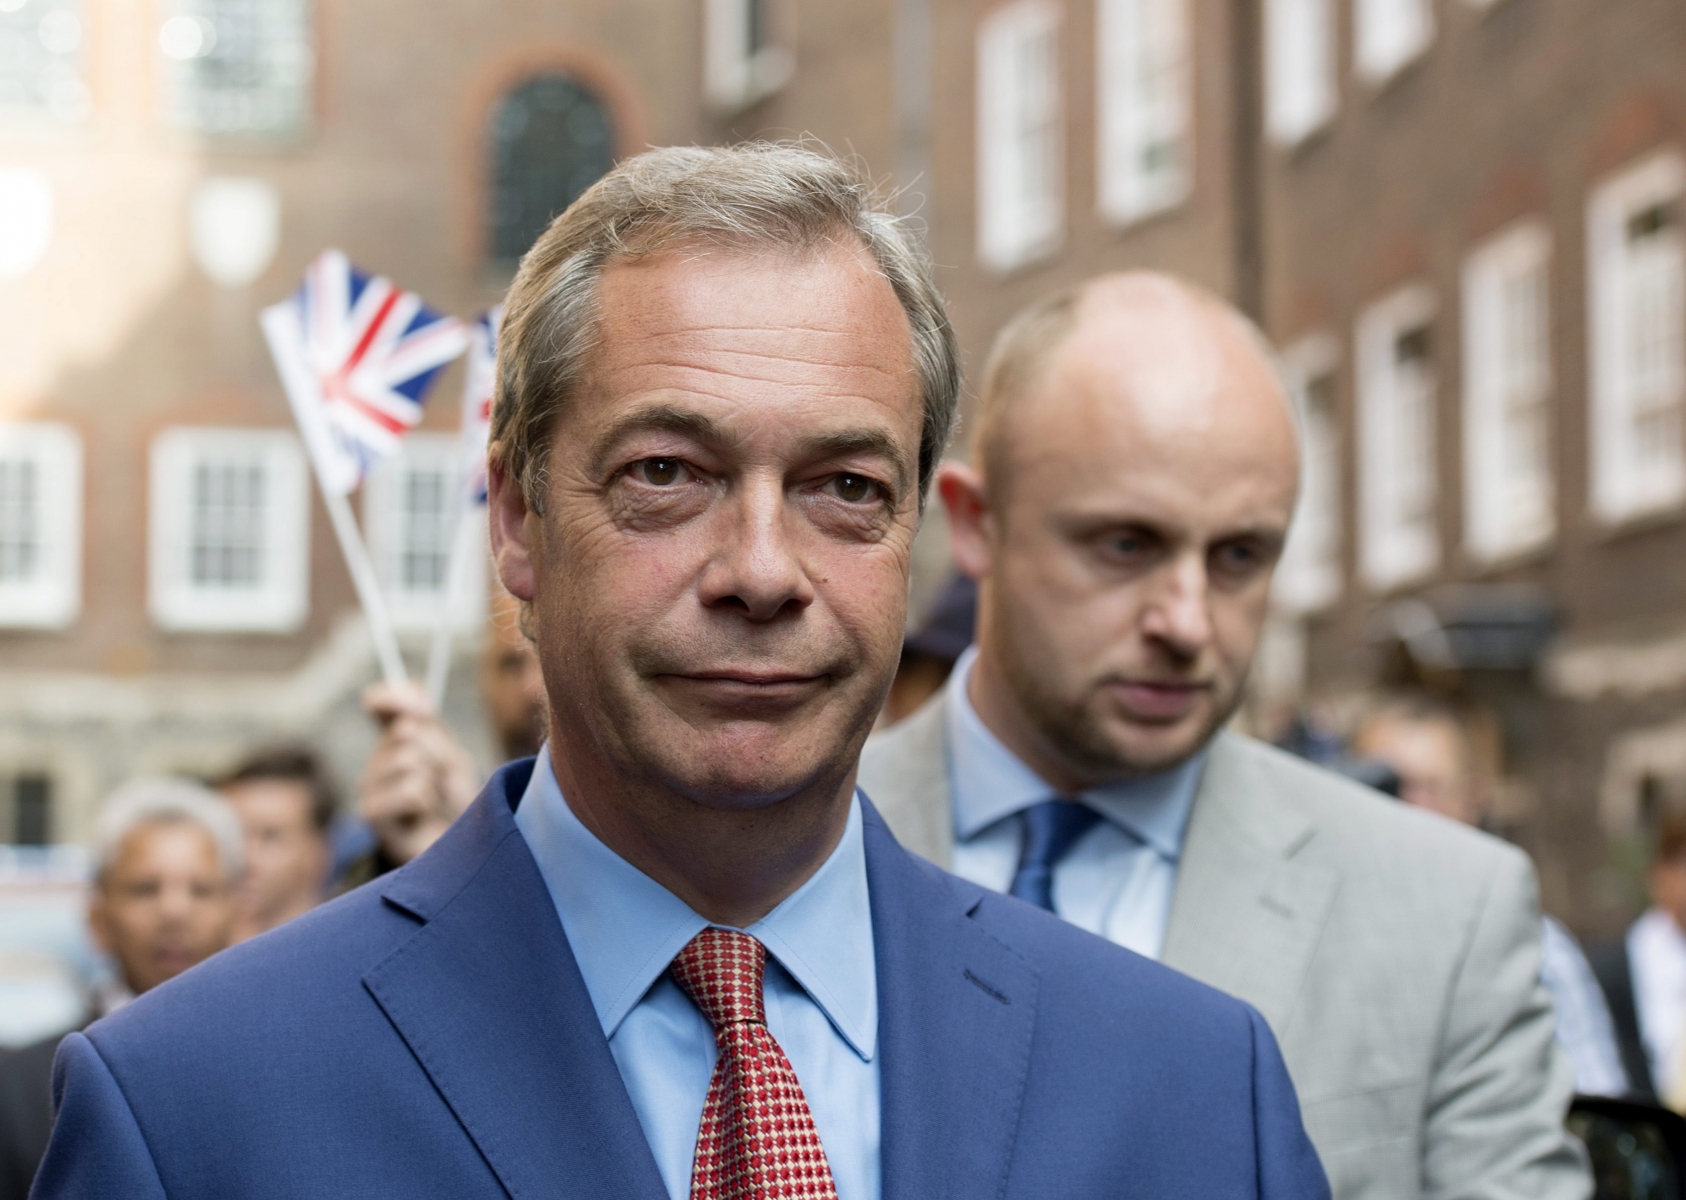 epa05387175 Leader of the United Kingdom (UK) Independence Party Nigel Farage walks through a street in central London, Britain, 24 June 2016. Britons in a referendum on 23 June have voted by a narrow margin to leave the European Union (EU). Media reports on early 24 June indicate that 51.9 per cent voted in favour of leaving the EU while 48.1 per cent voted for remaining in.  EPA/HANNAH MCKAY  EPA/HANNAH MCKAY